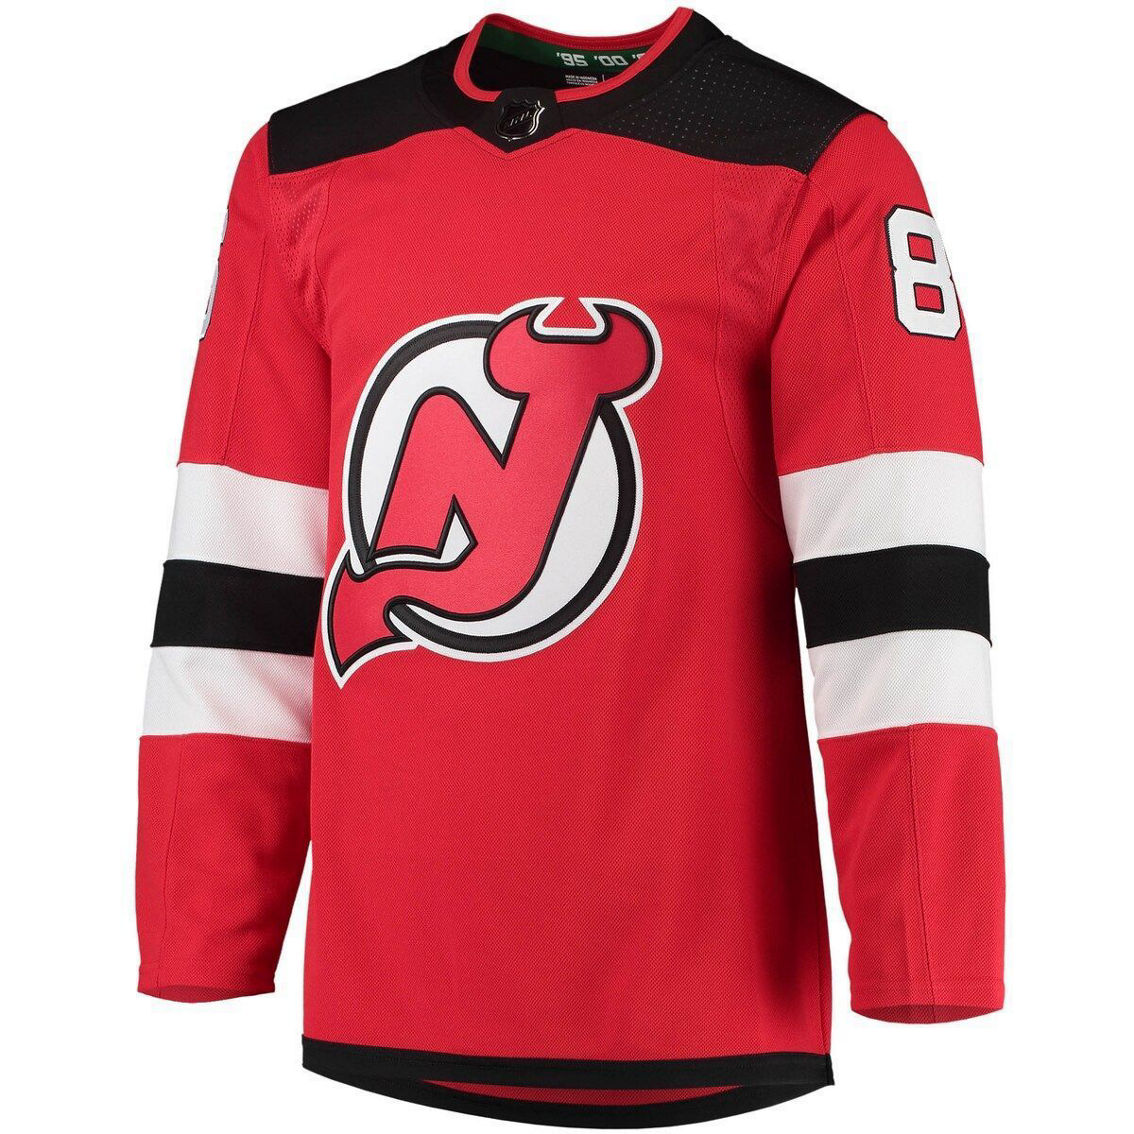 adidas Men's Jack Hughes Red New Jersey Devils Home Primegreen Authentic Pro Player Jersey - Image 3 of 4